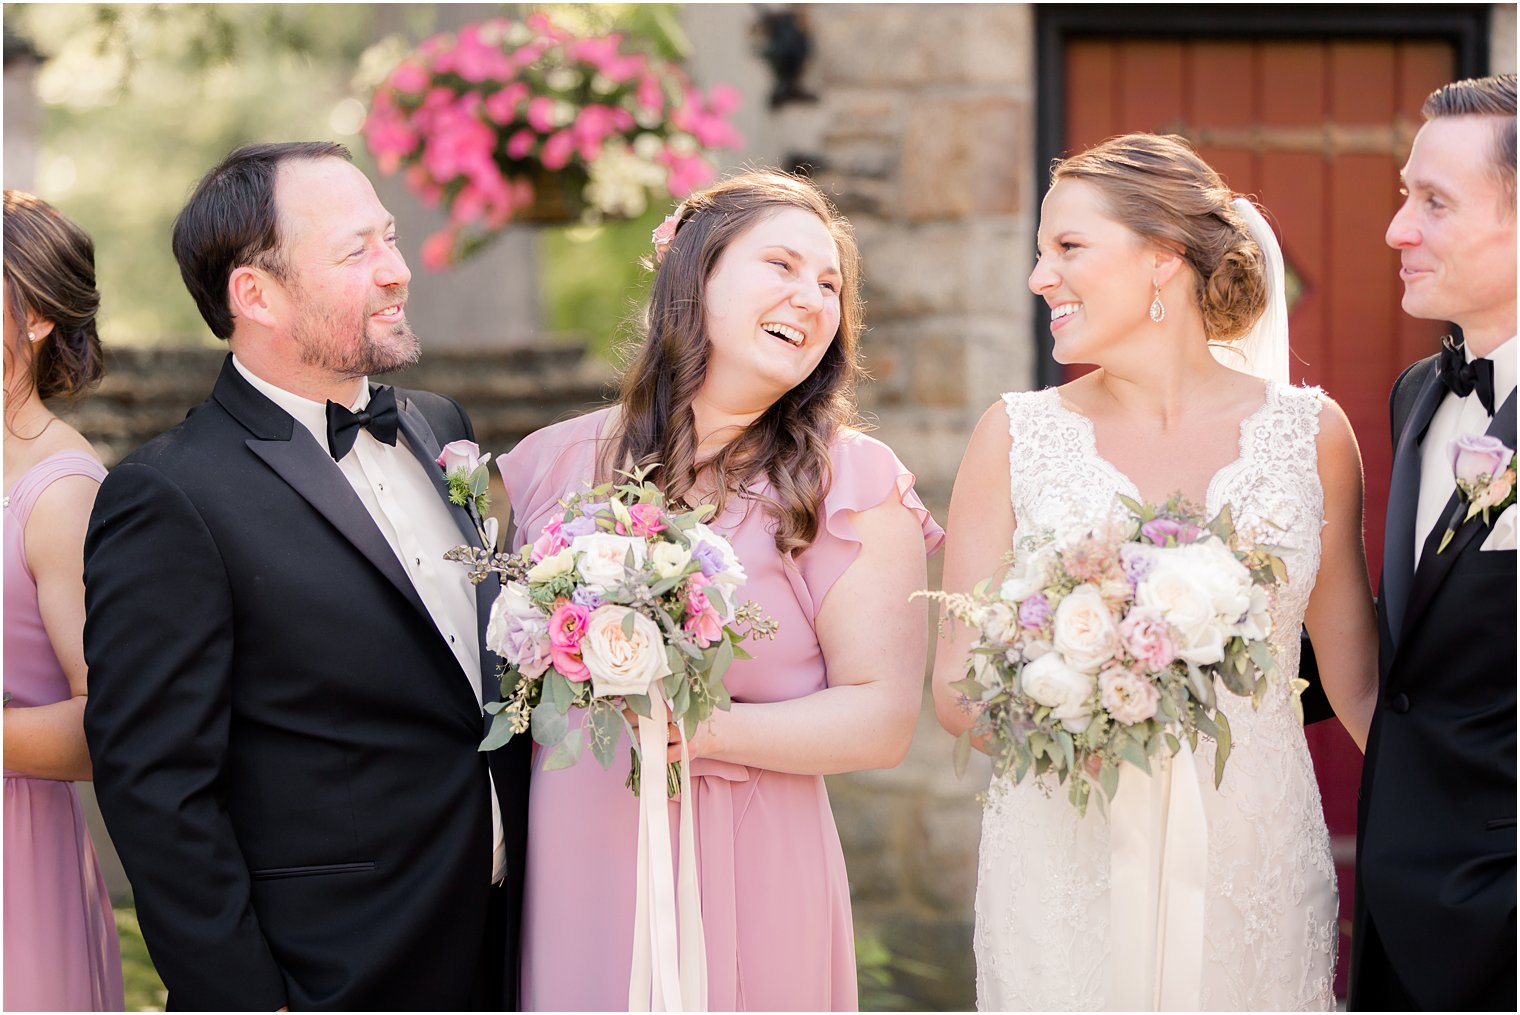 Candid photo between bridal party members